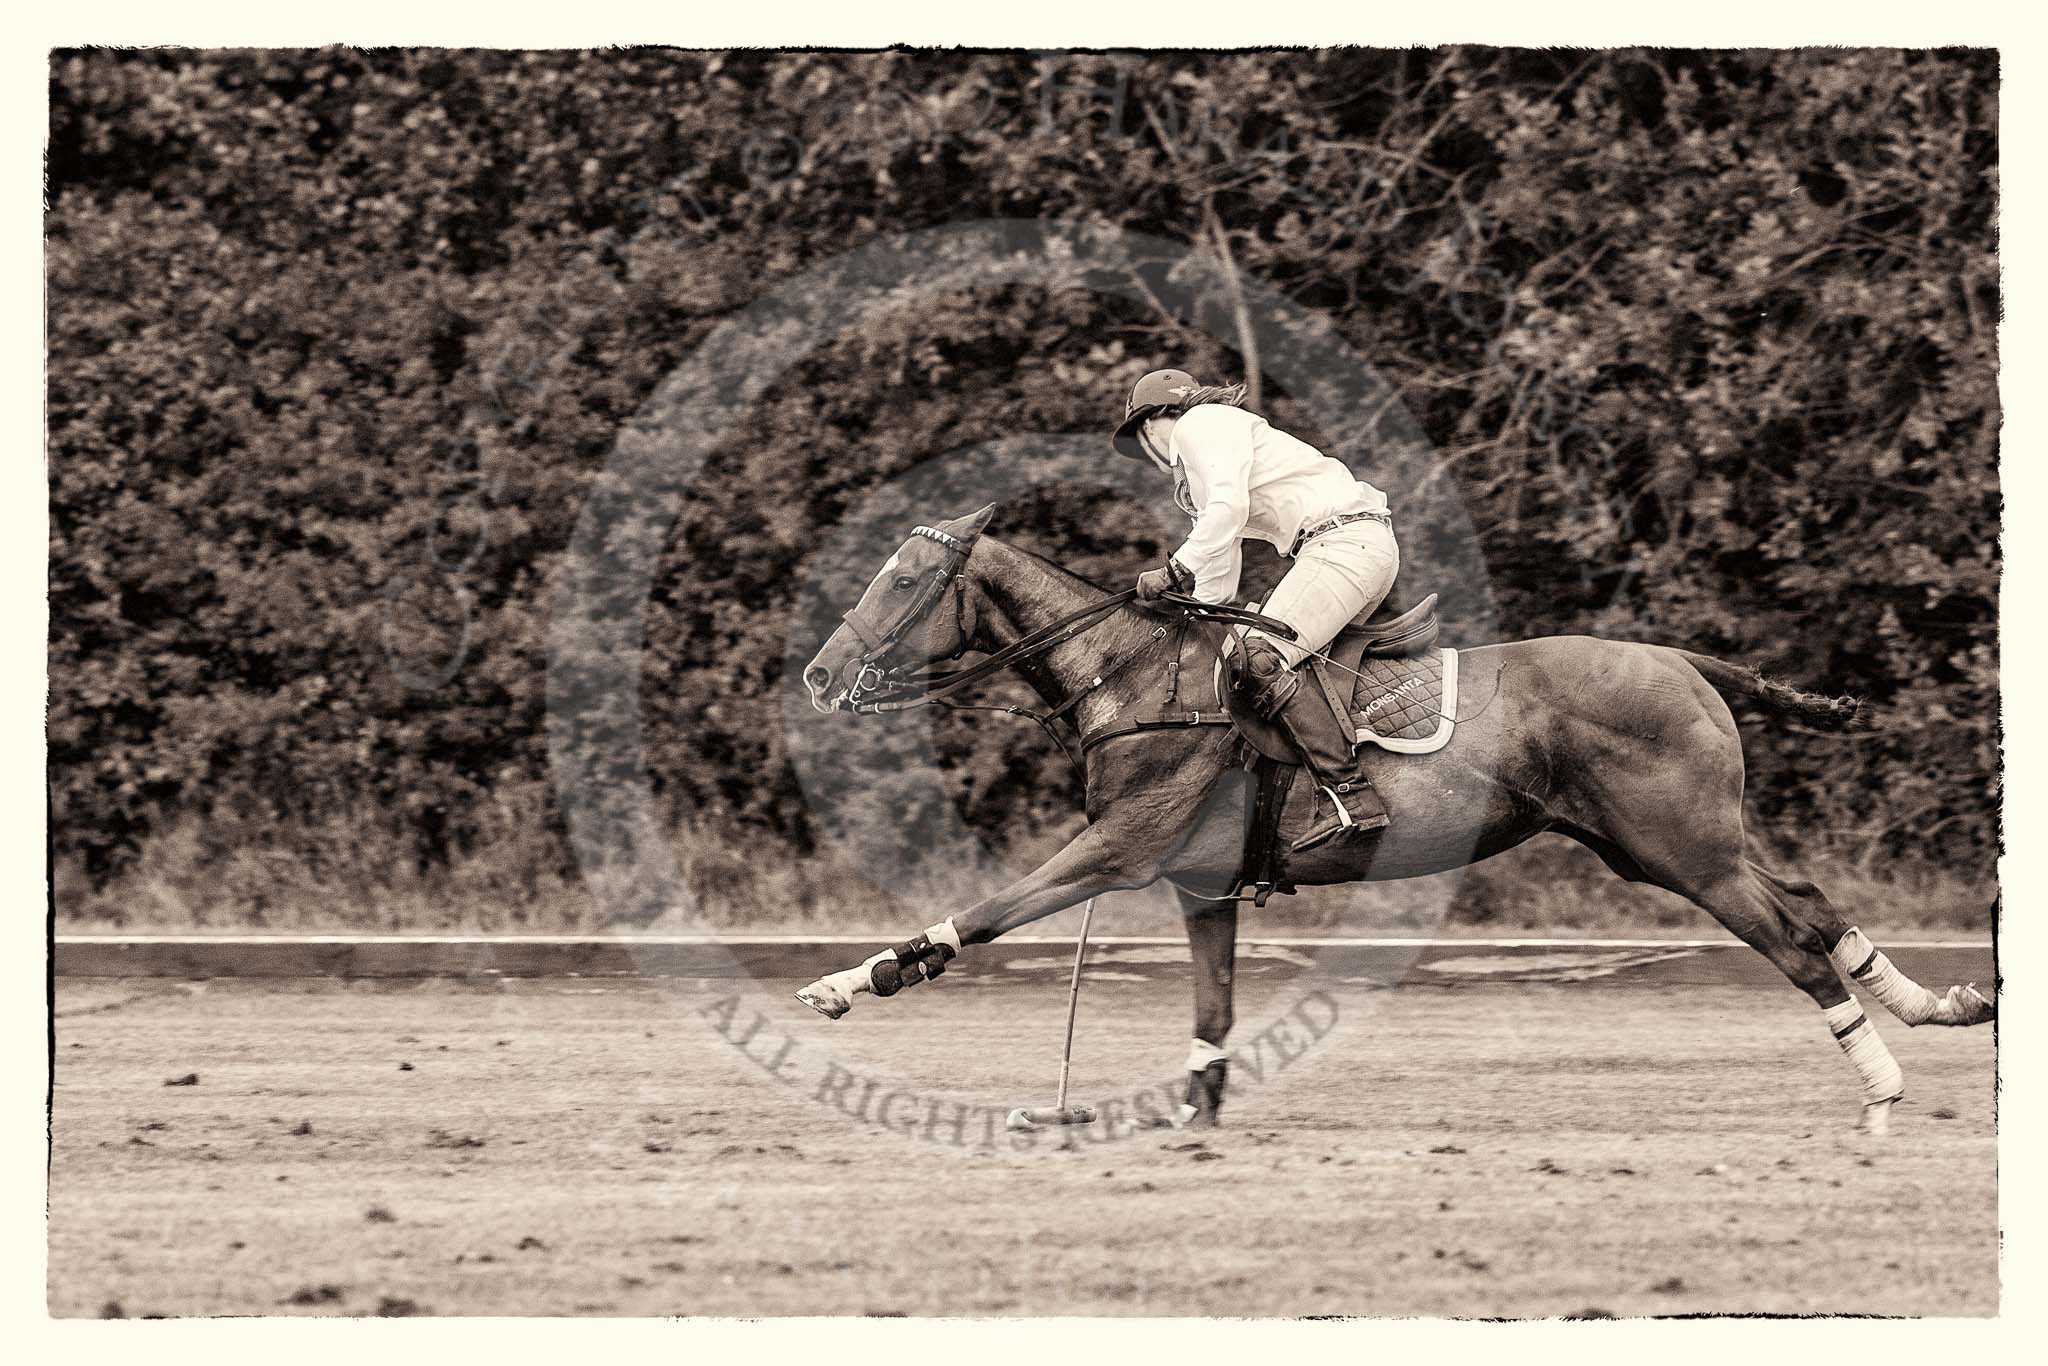 7th Heritage Polo Cup semi-finals: La Golondrina Argentina Brownie Taylor (0) GB..
Hurtwood Park Polo Club,
Ewhurst Green,
Surrey,
United Kingdom,
on 04 August 2012 at 15:50, image #288